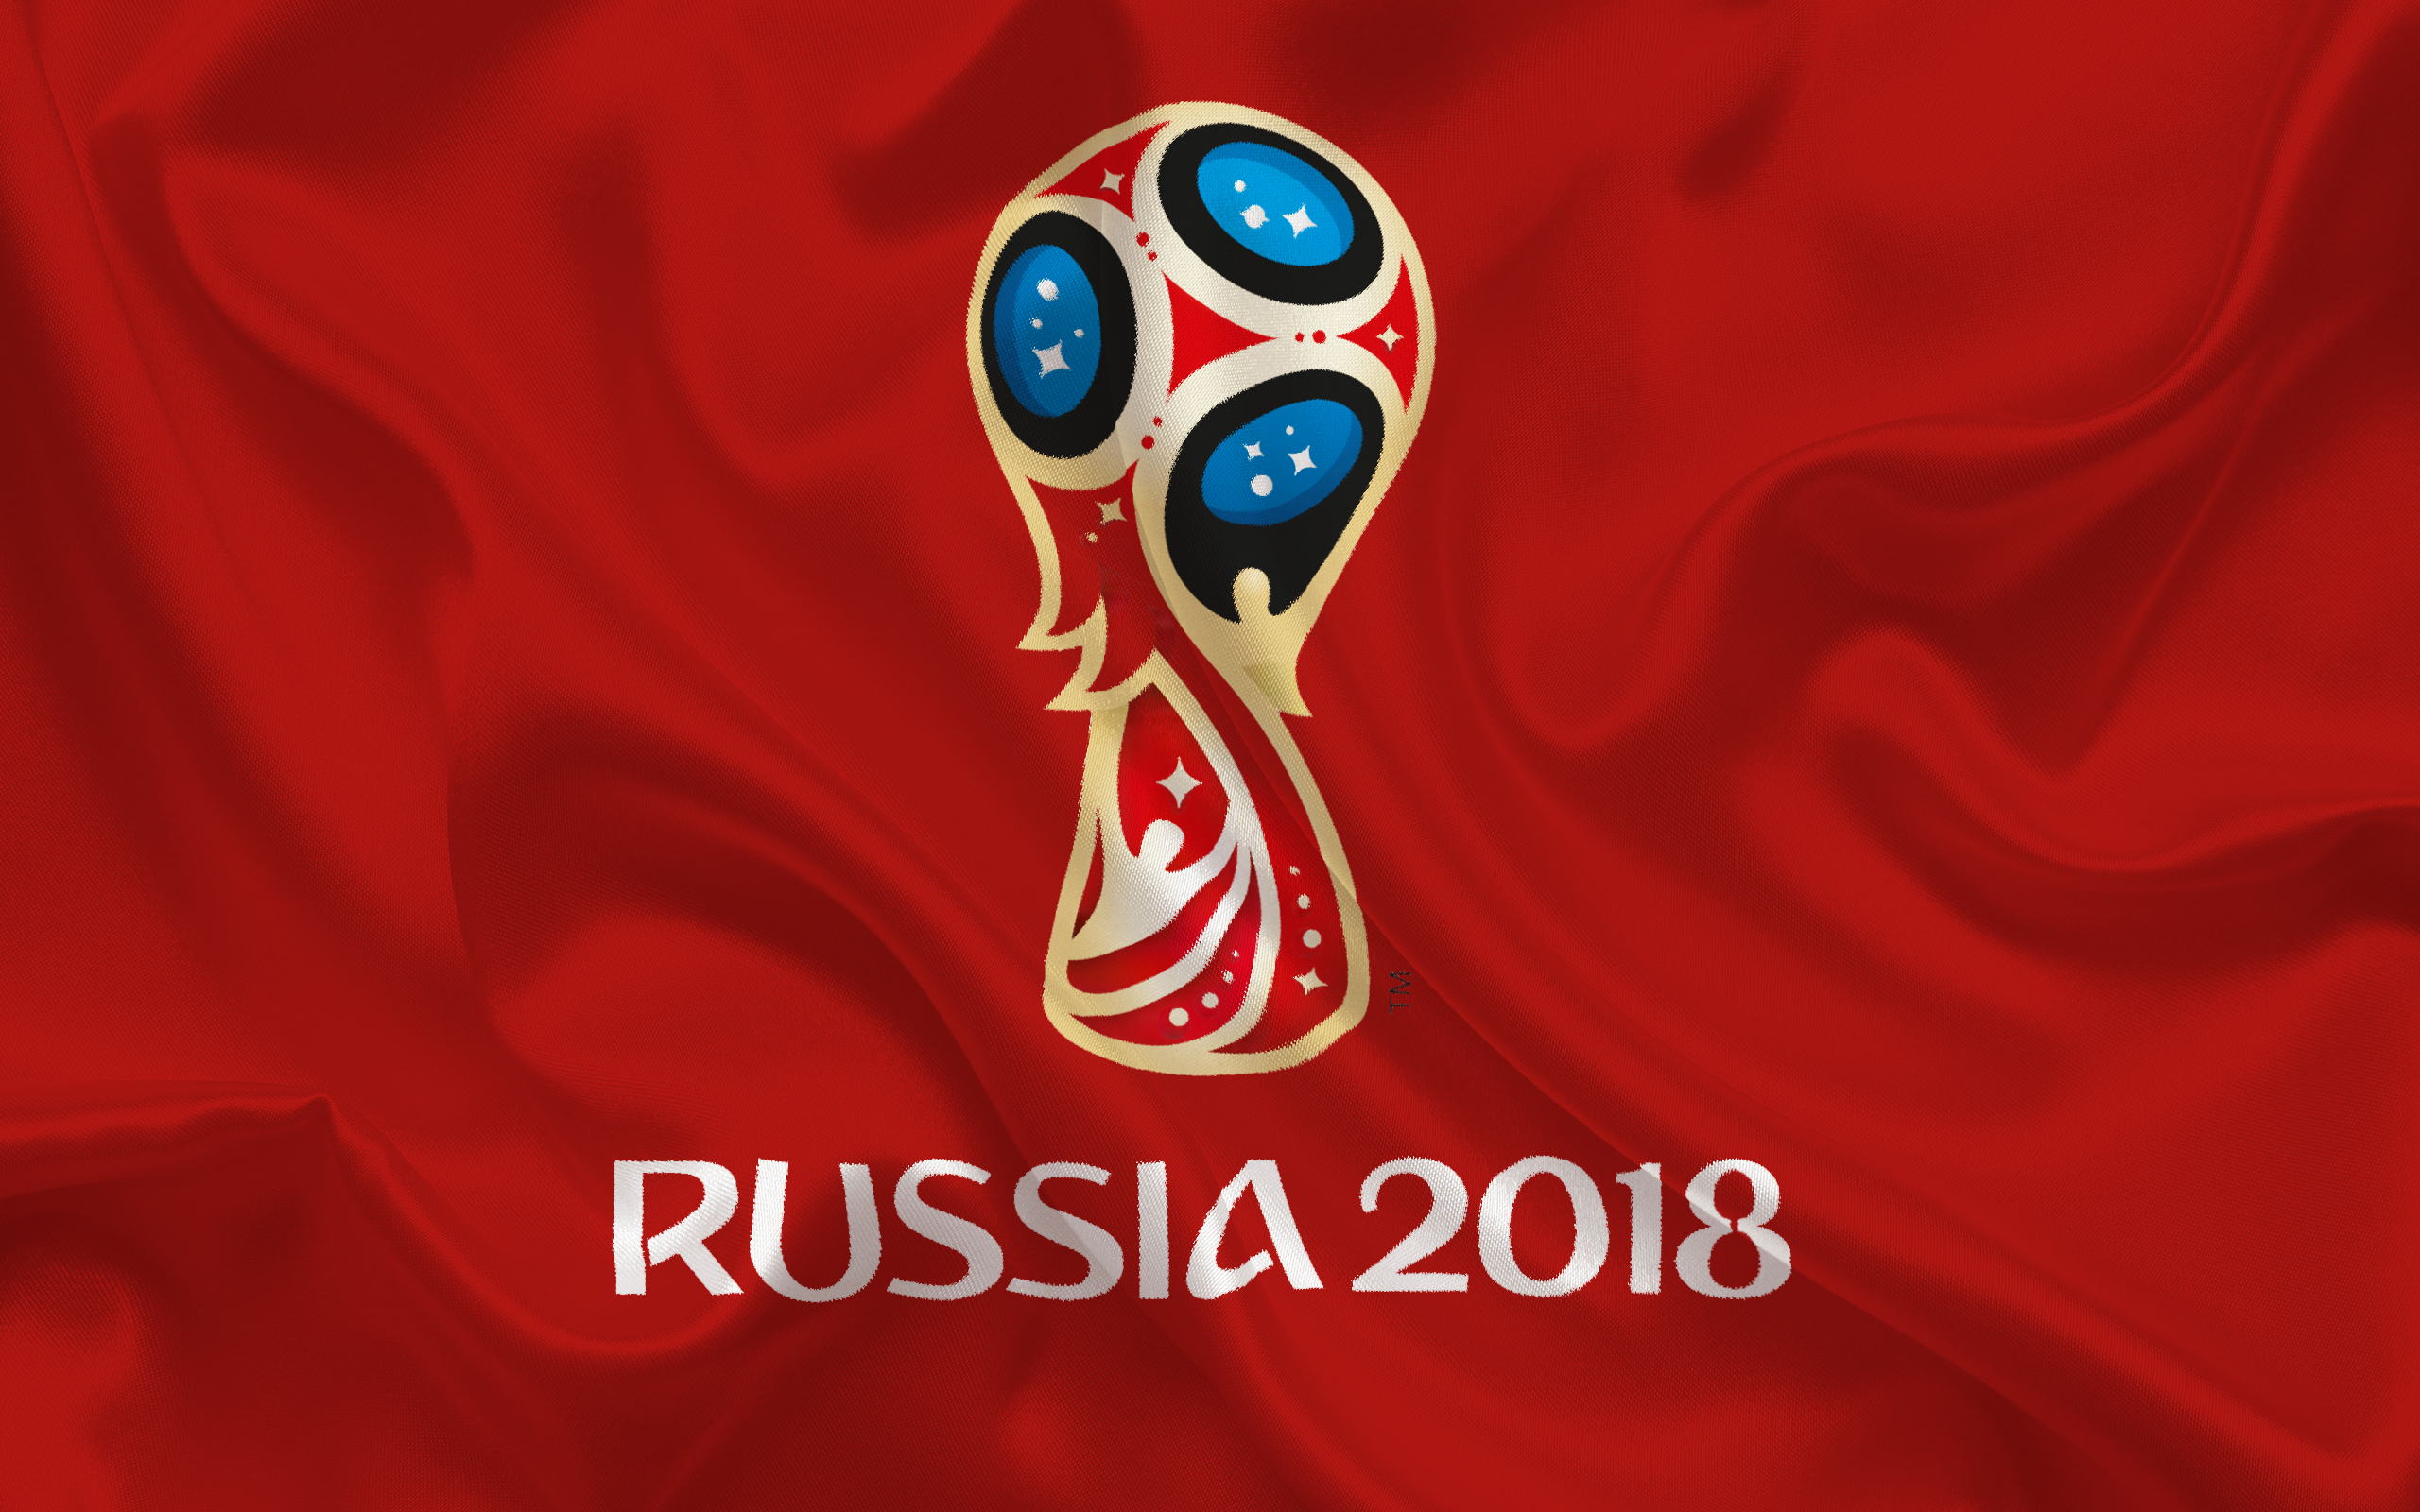 sports, 2018 fifa world cup, logo, soccer, world cup 2018, world cup